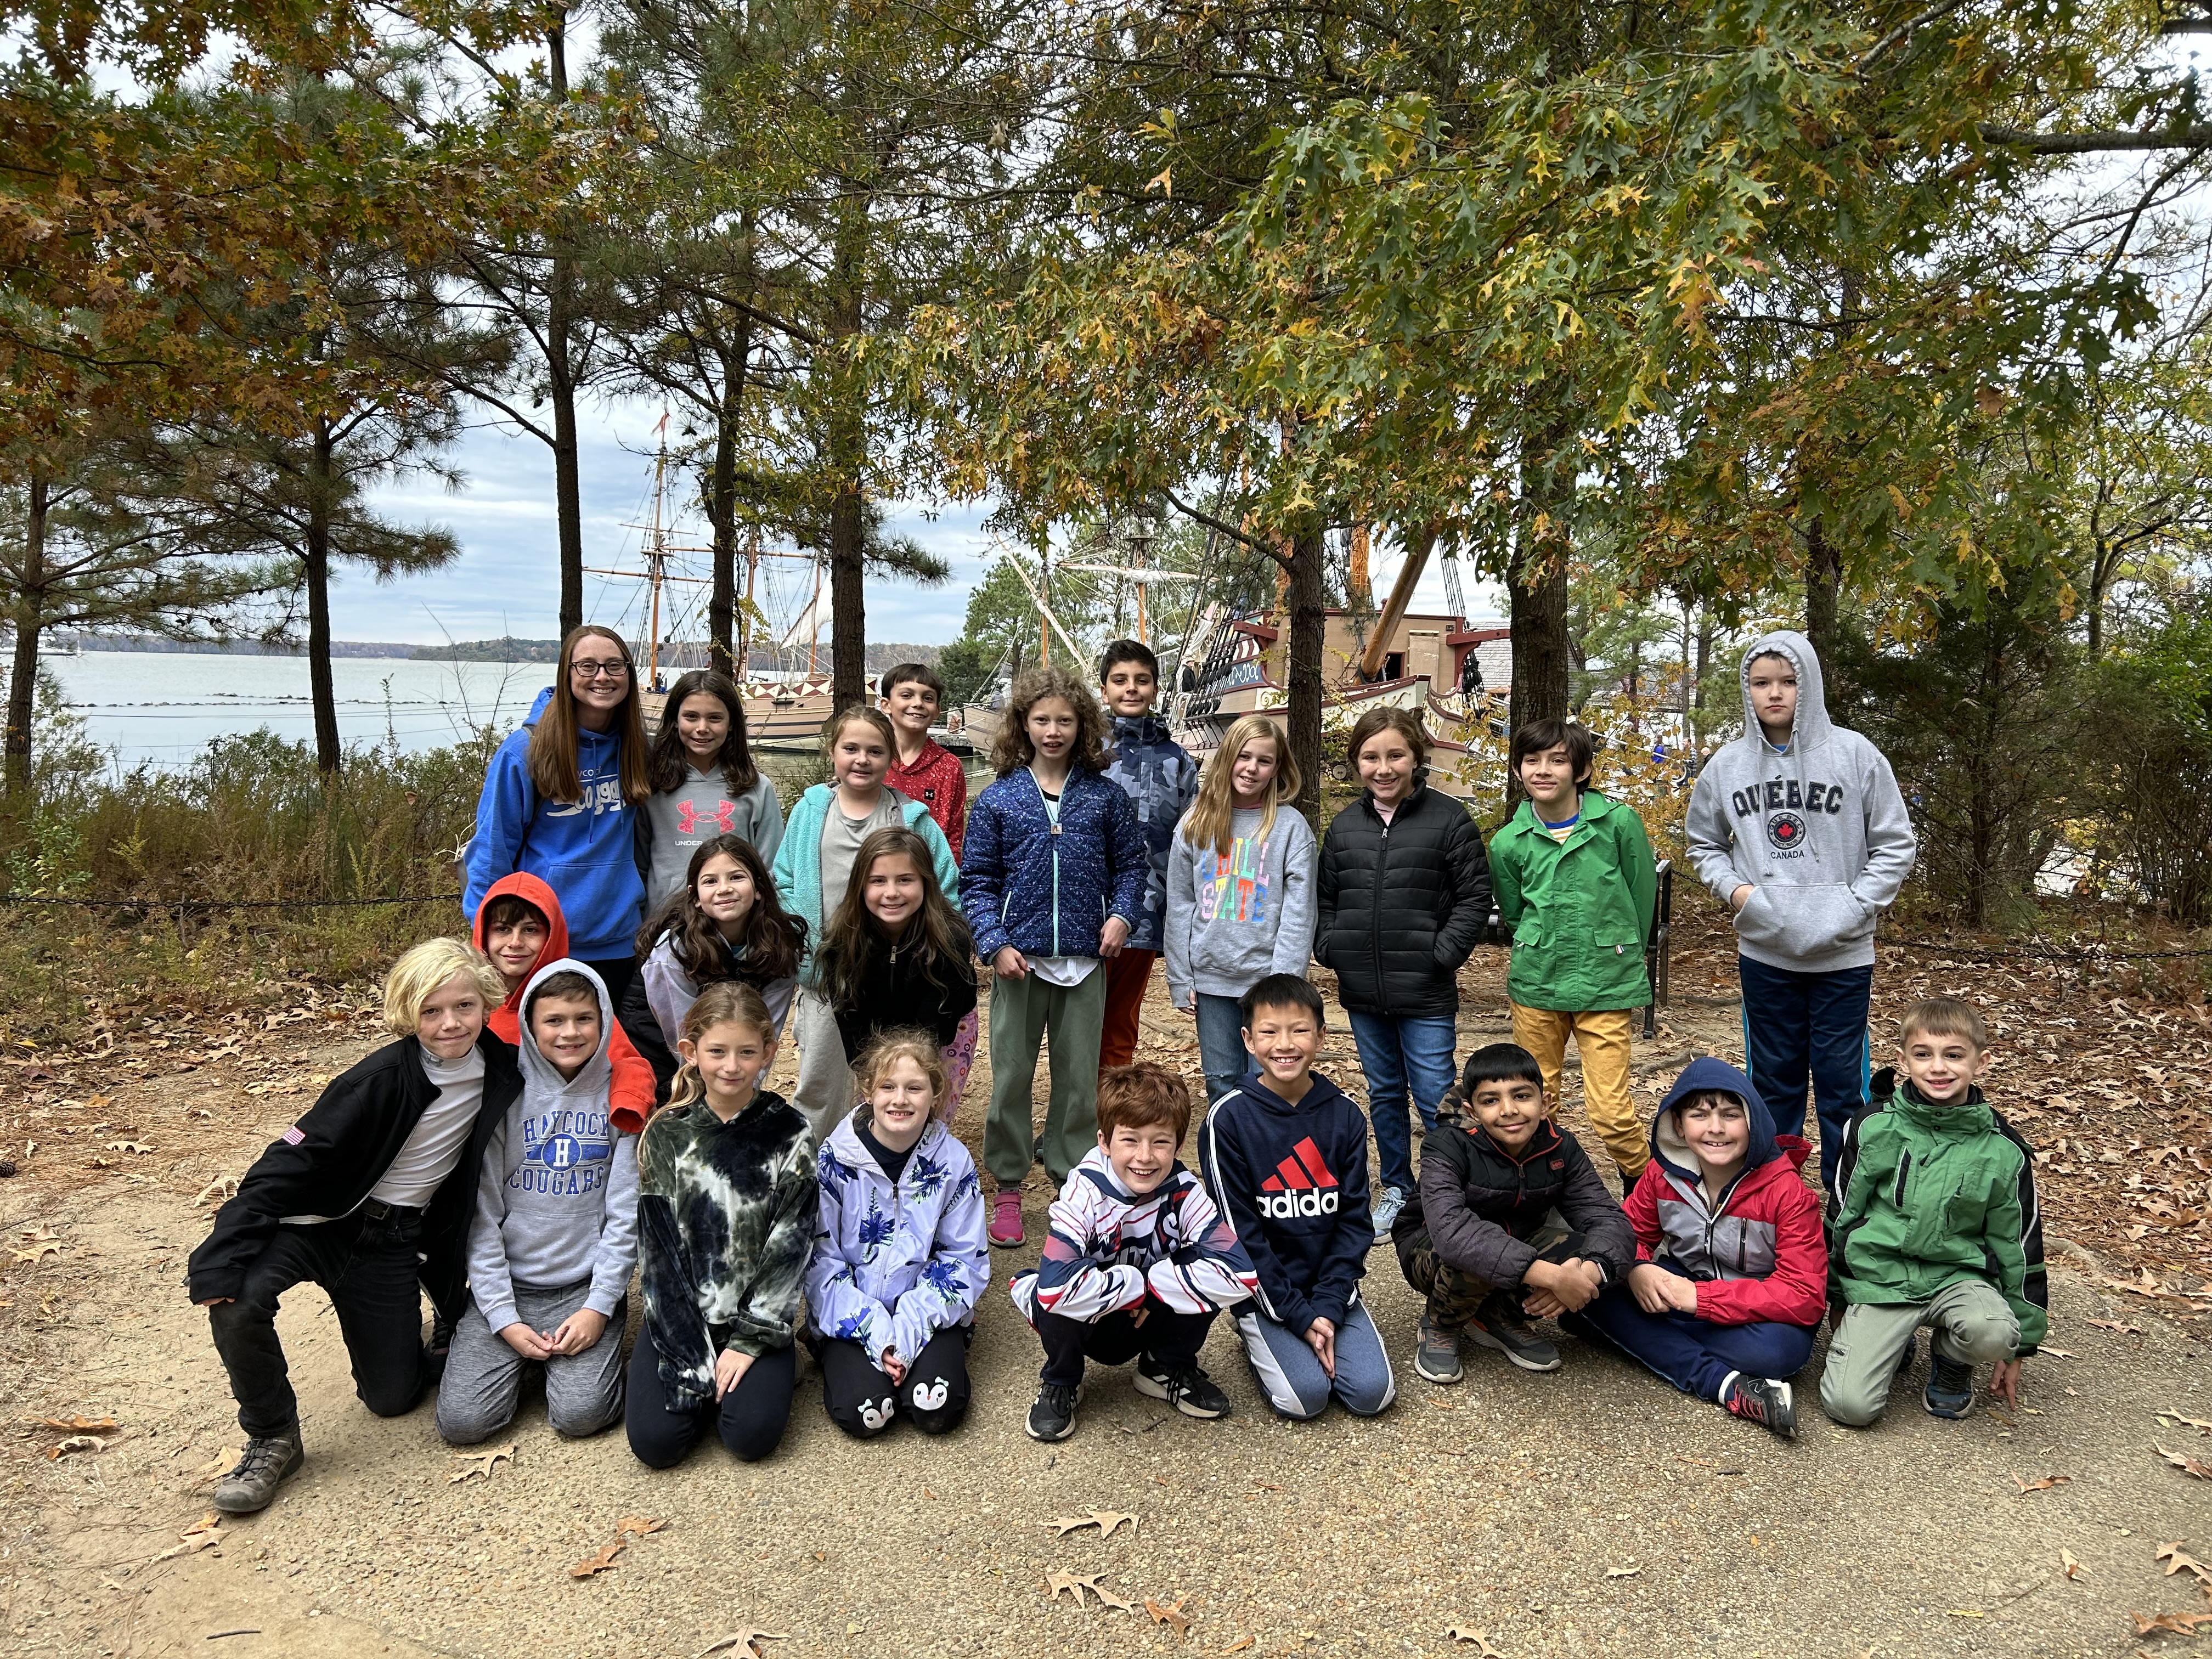 ms. mostoller's class poses for the camera on a field trip. students are dressed in warm clothes for the weather.in the background are trees and a boat on the river near jamestown, virginia.